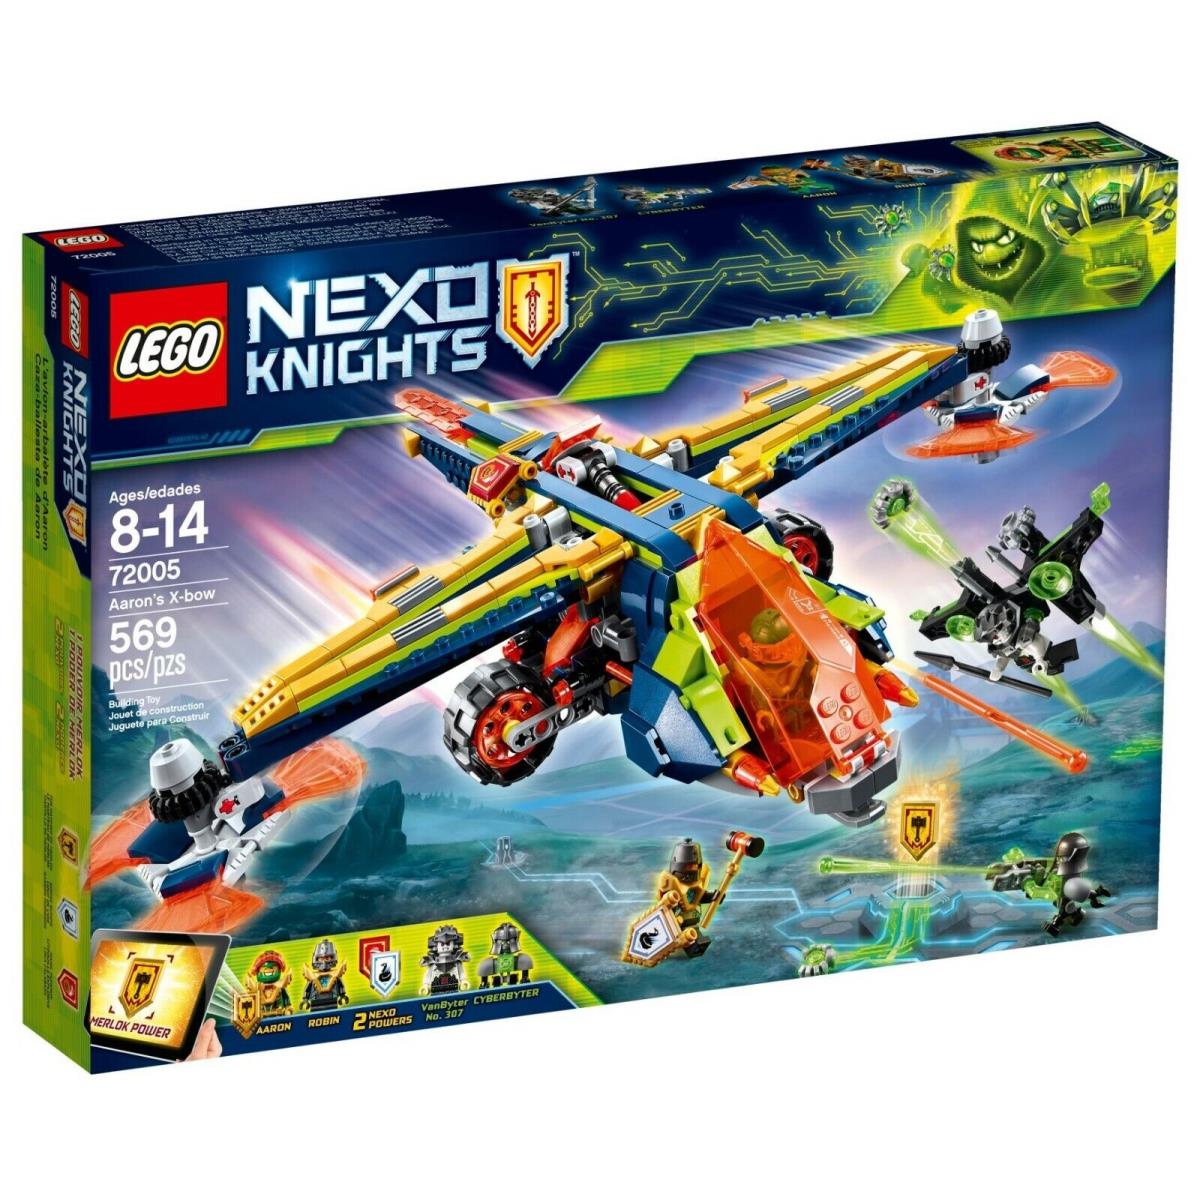 Lego 72005 Aarons X-bow Plane Nexo Knights Retired Mint - Red